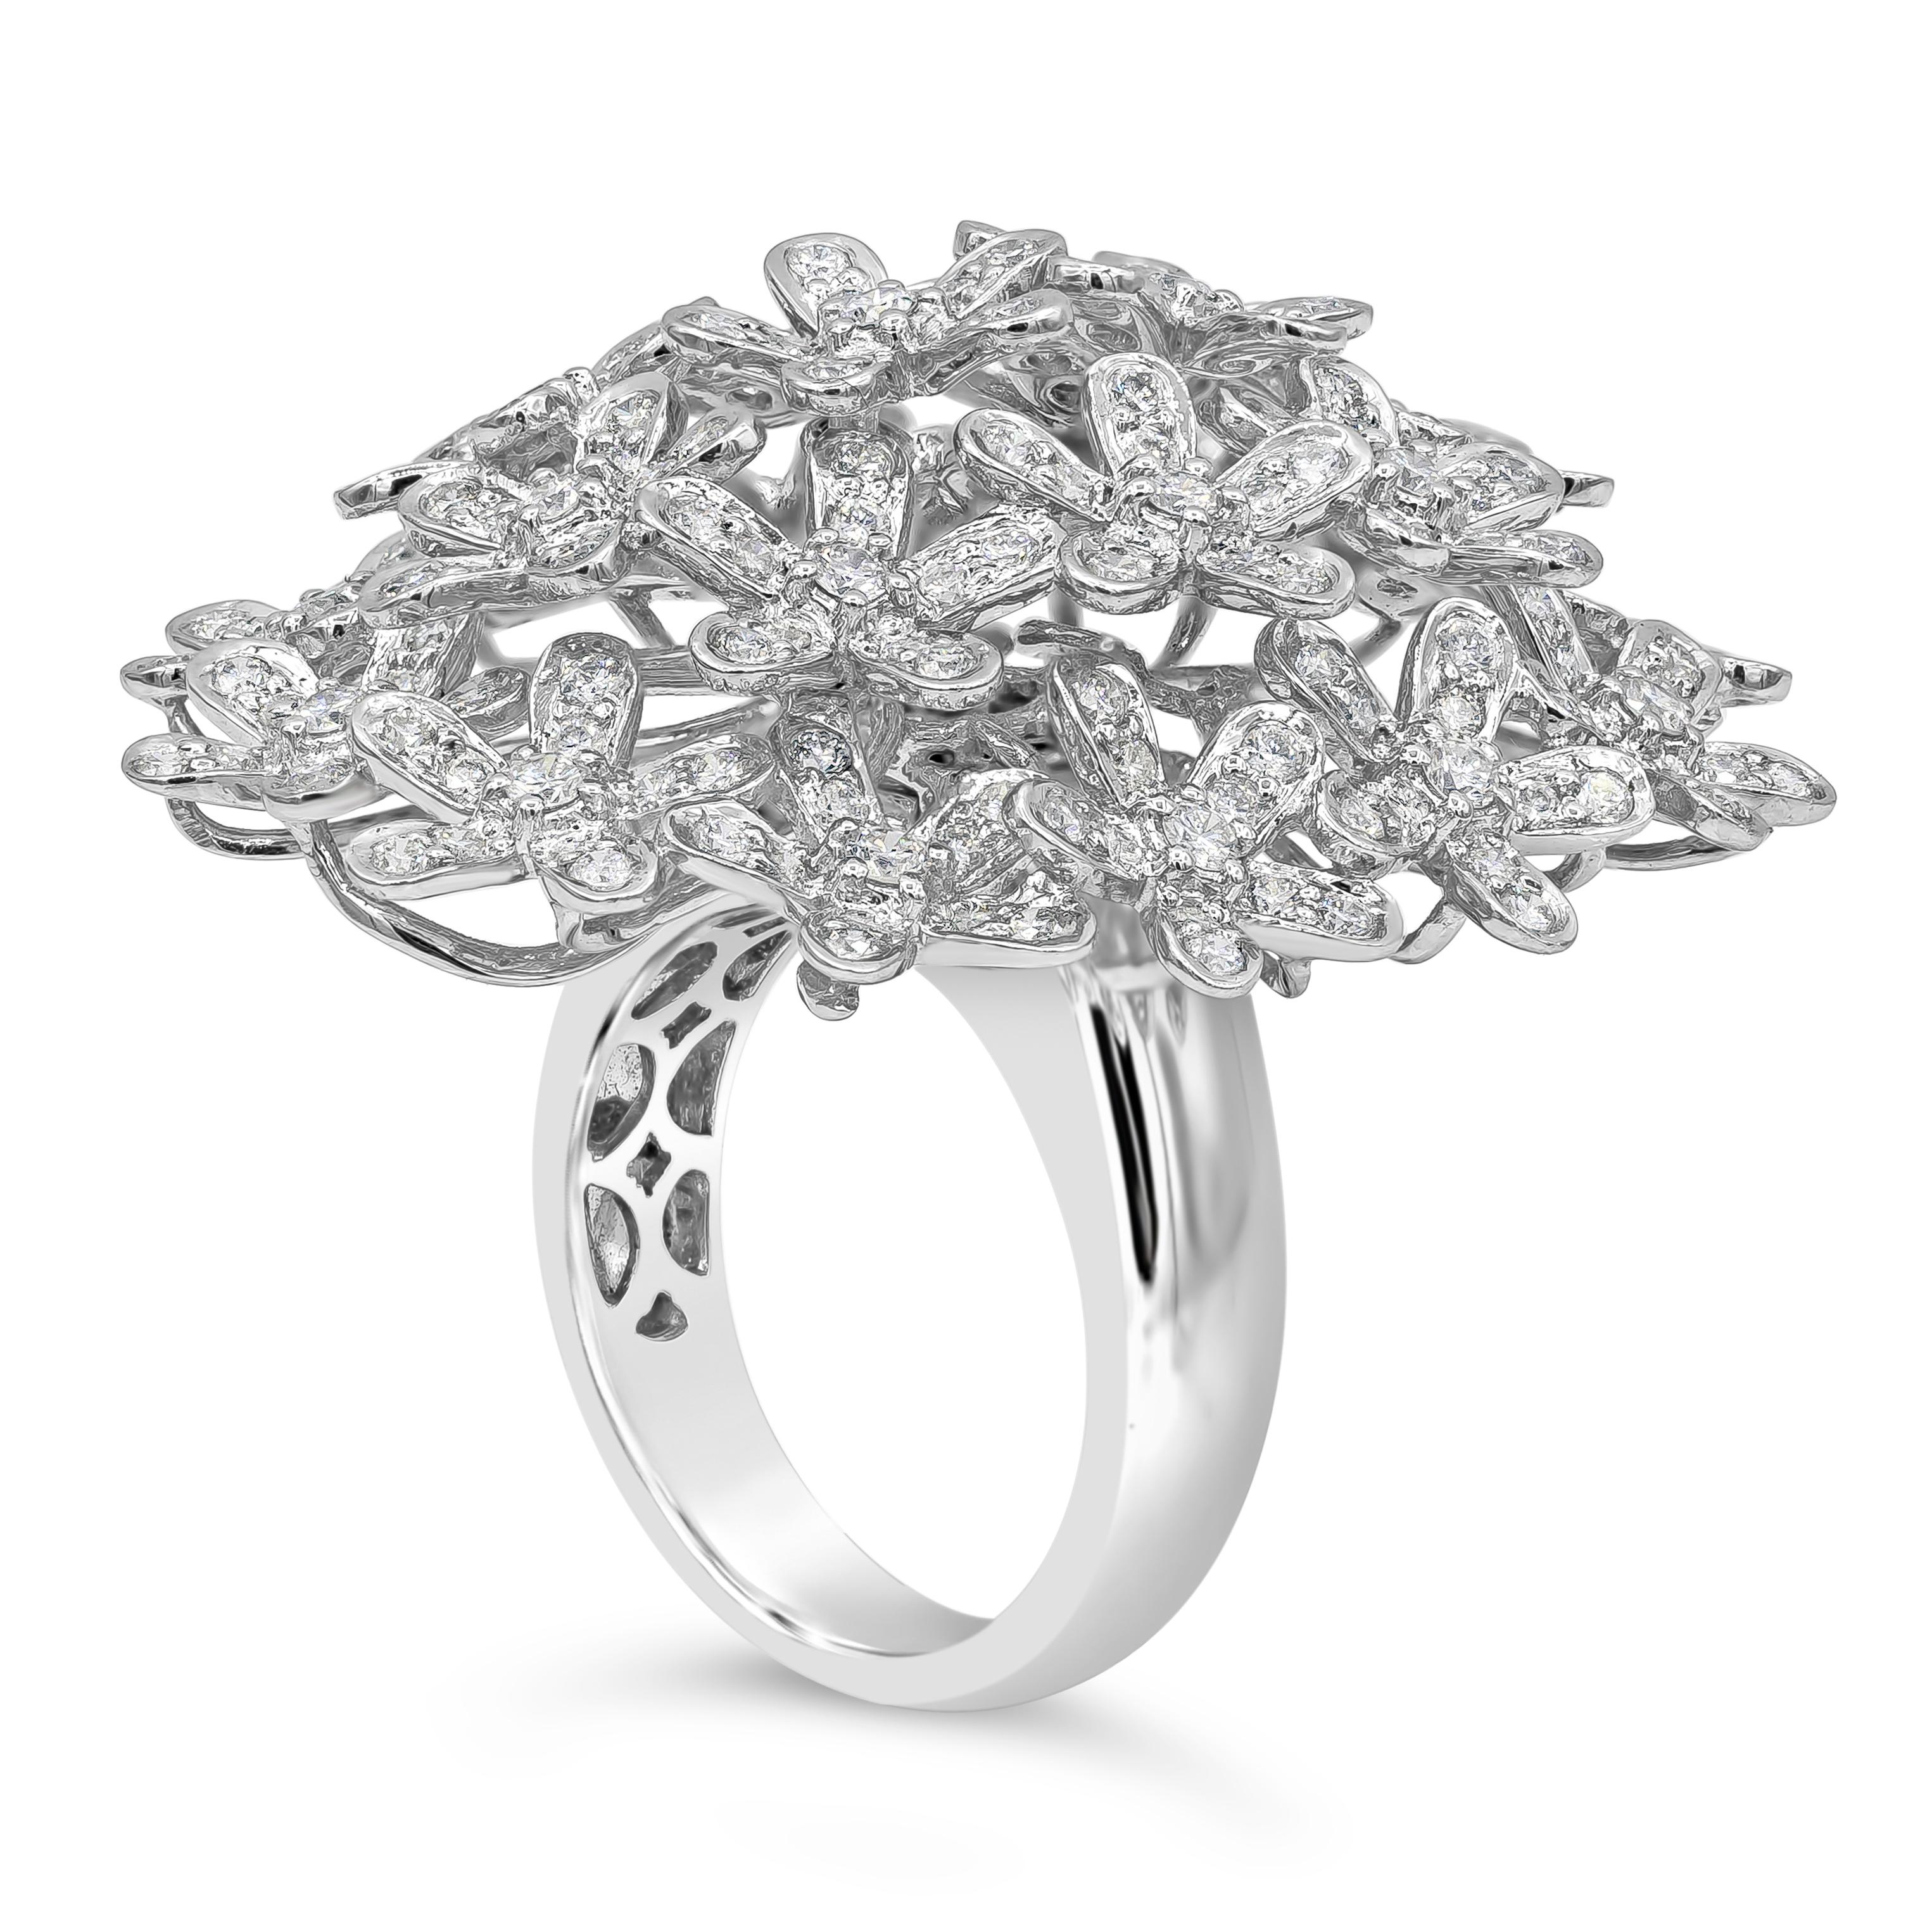 This fashionable and stylish fashion ring showcases 242 pieces of brilliant round cut diamonds weighing 3.06 carats total, beautifully set in an open-work floral motif design. Diamonds are finely set in a 18k white gold mounting. Size 7 US resizable